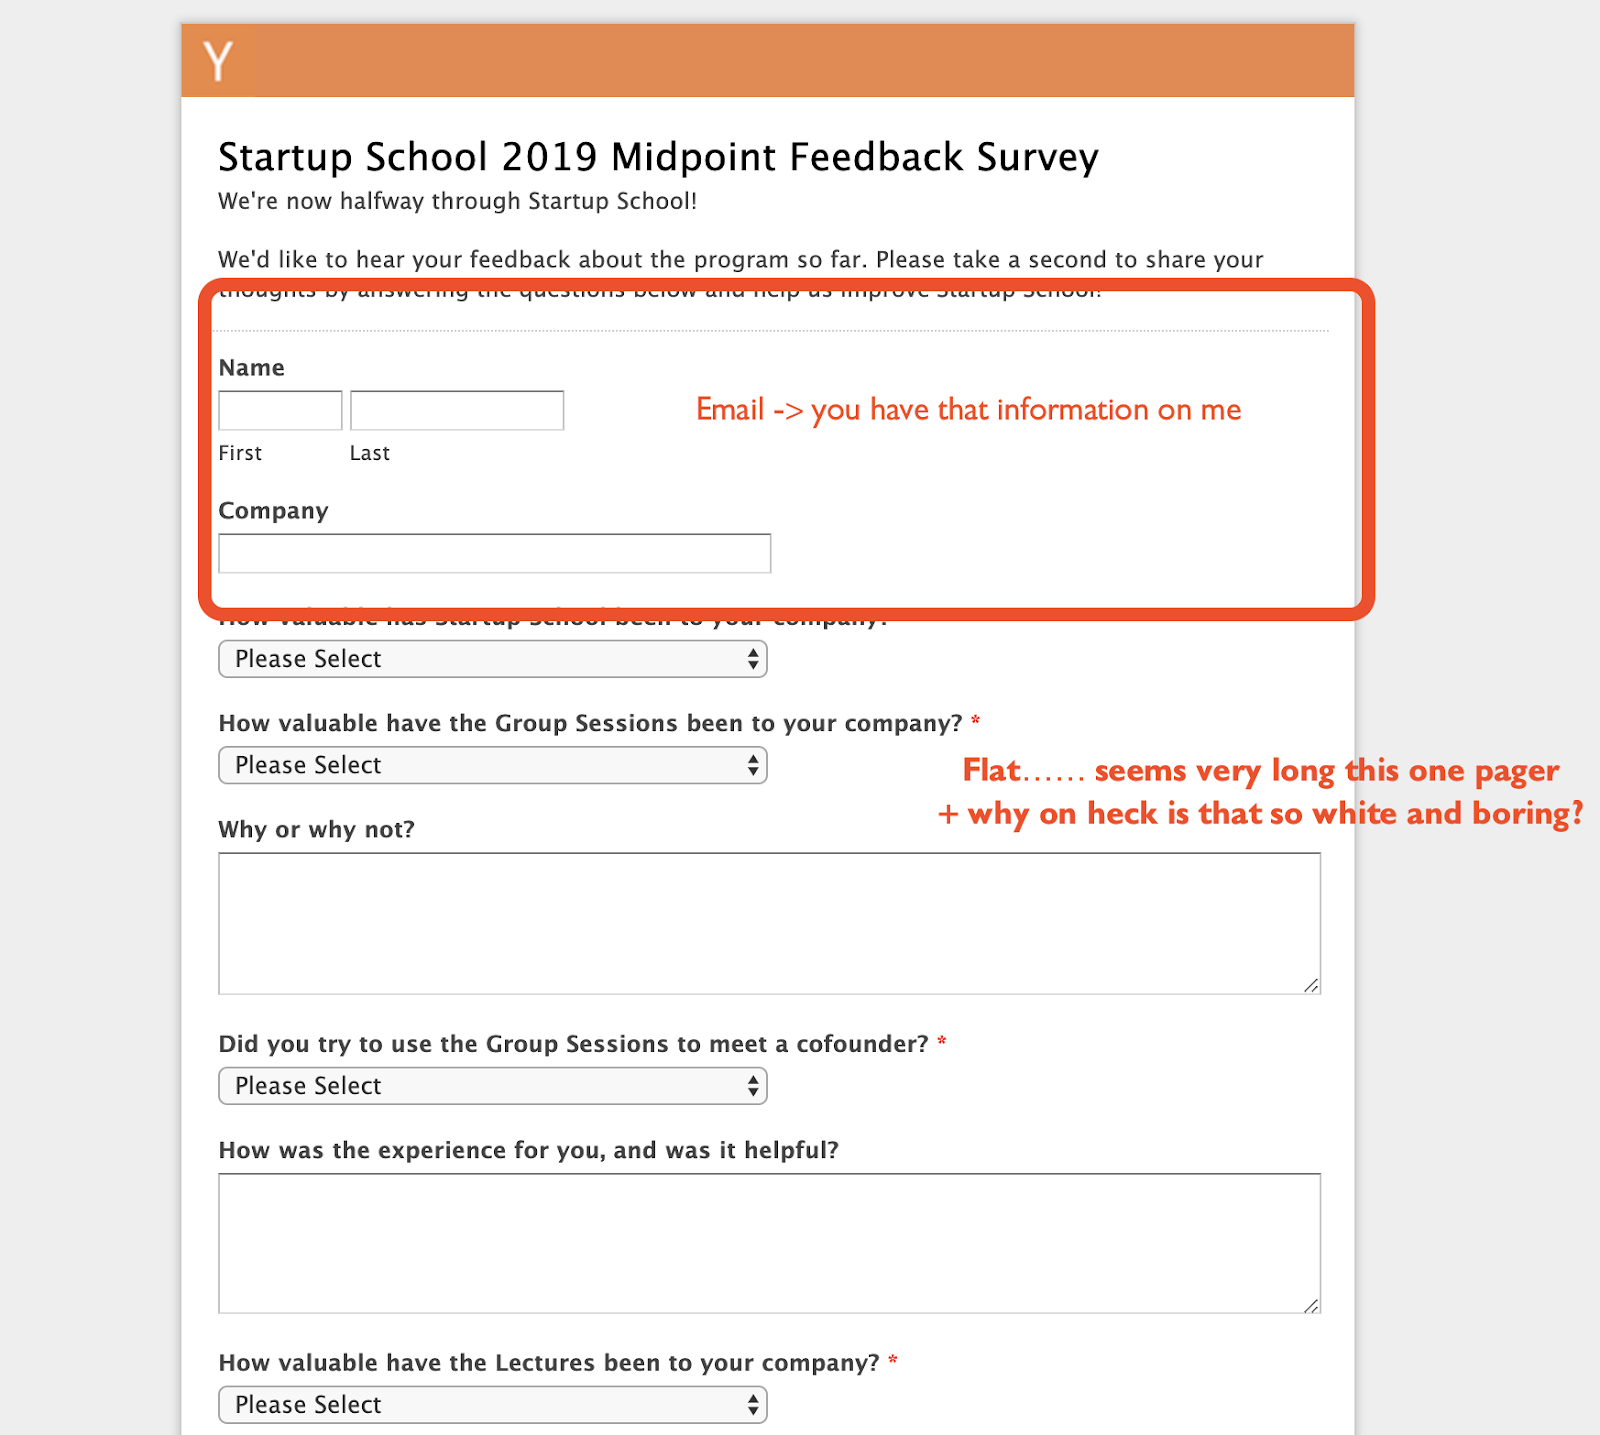 Not personalized feedback forms